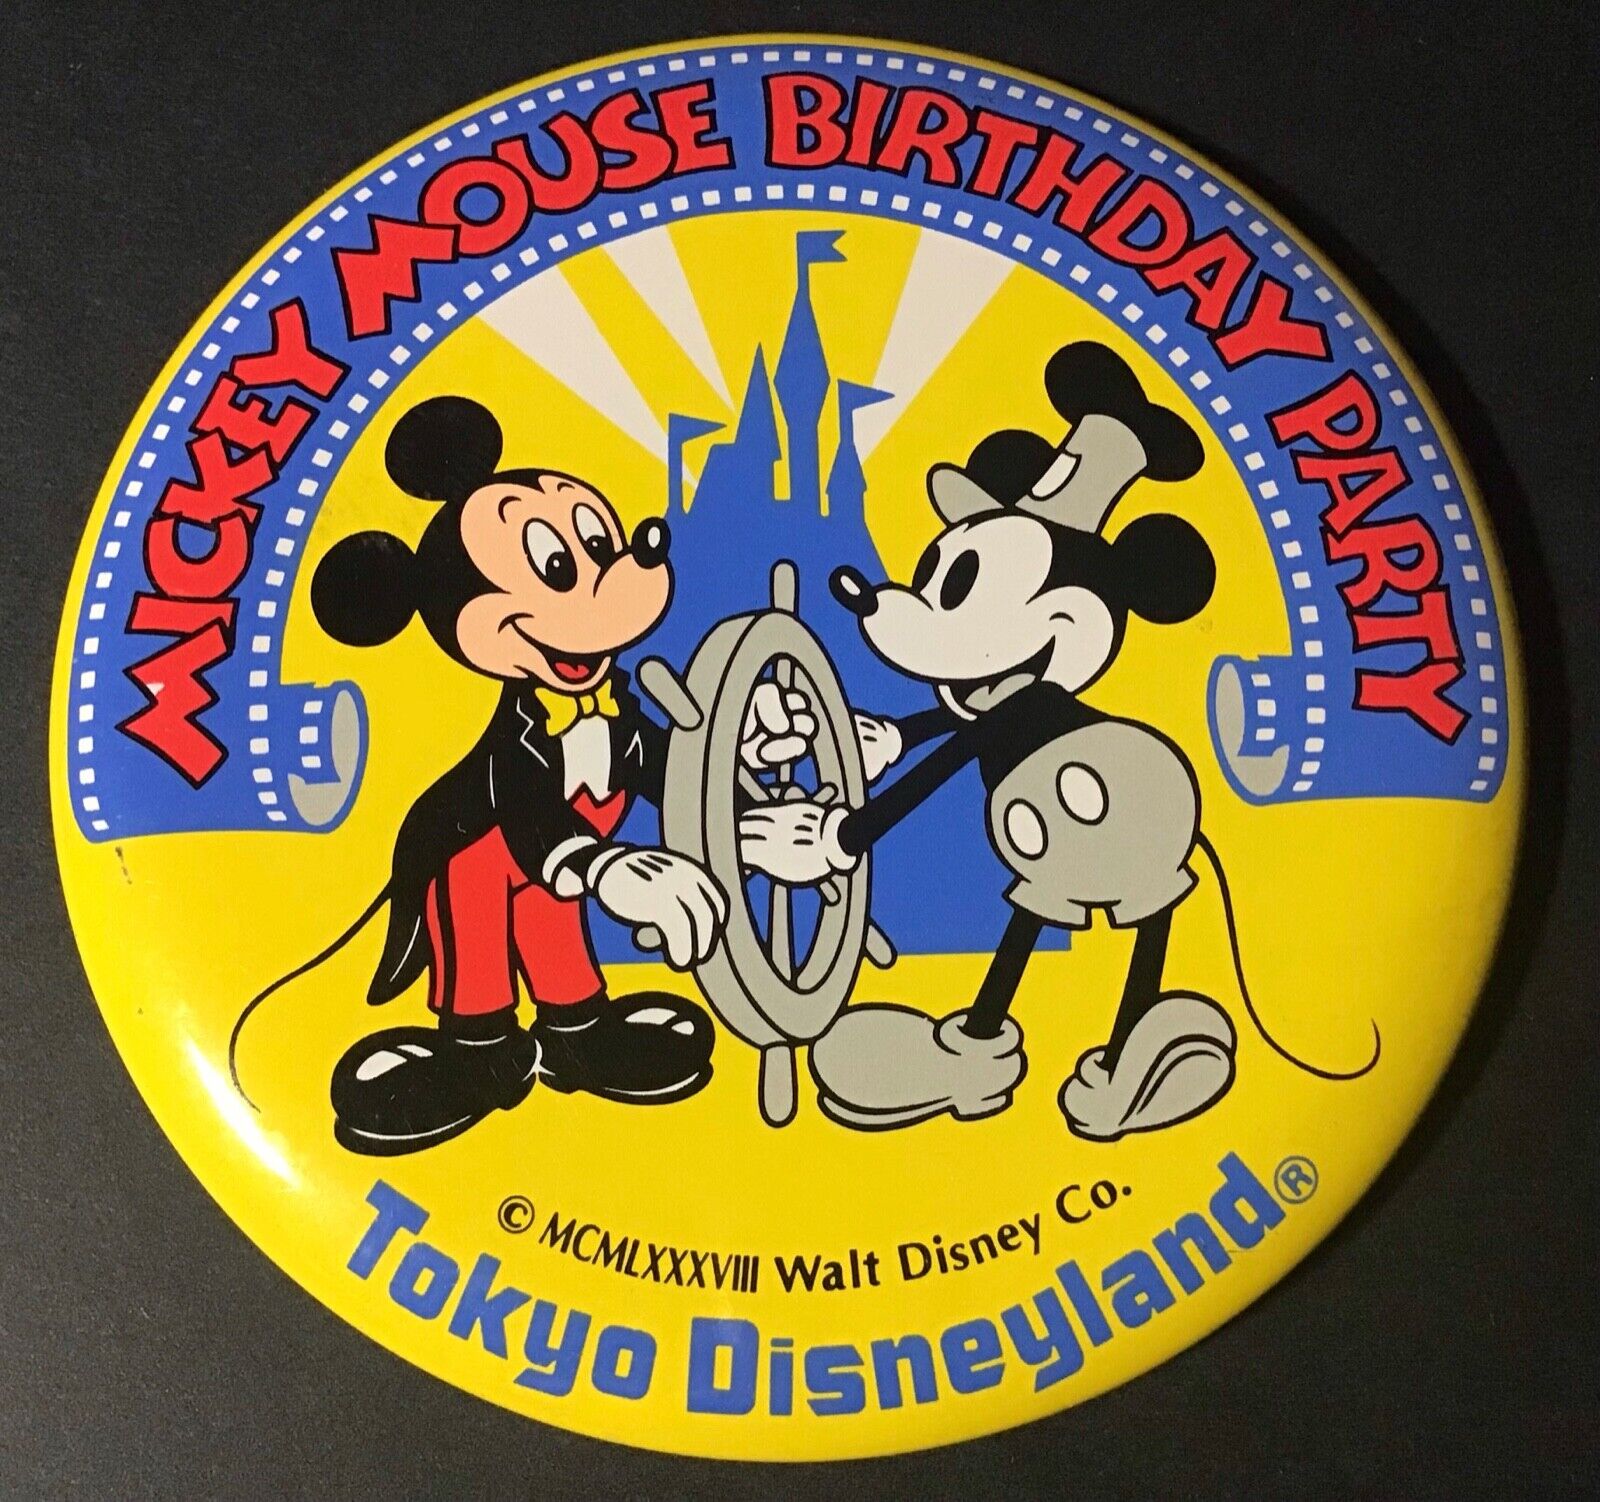 1988 Tokyo Disneyland Mickey Mouse Birthday Party Steamboat Willie 3.5” Pinback